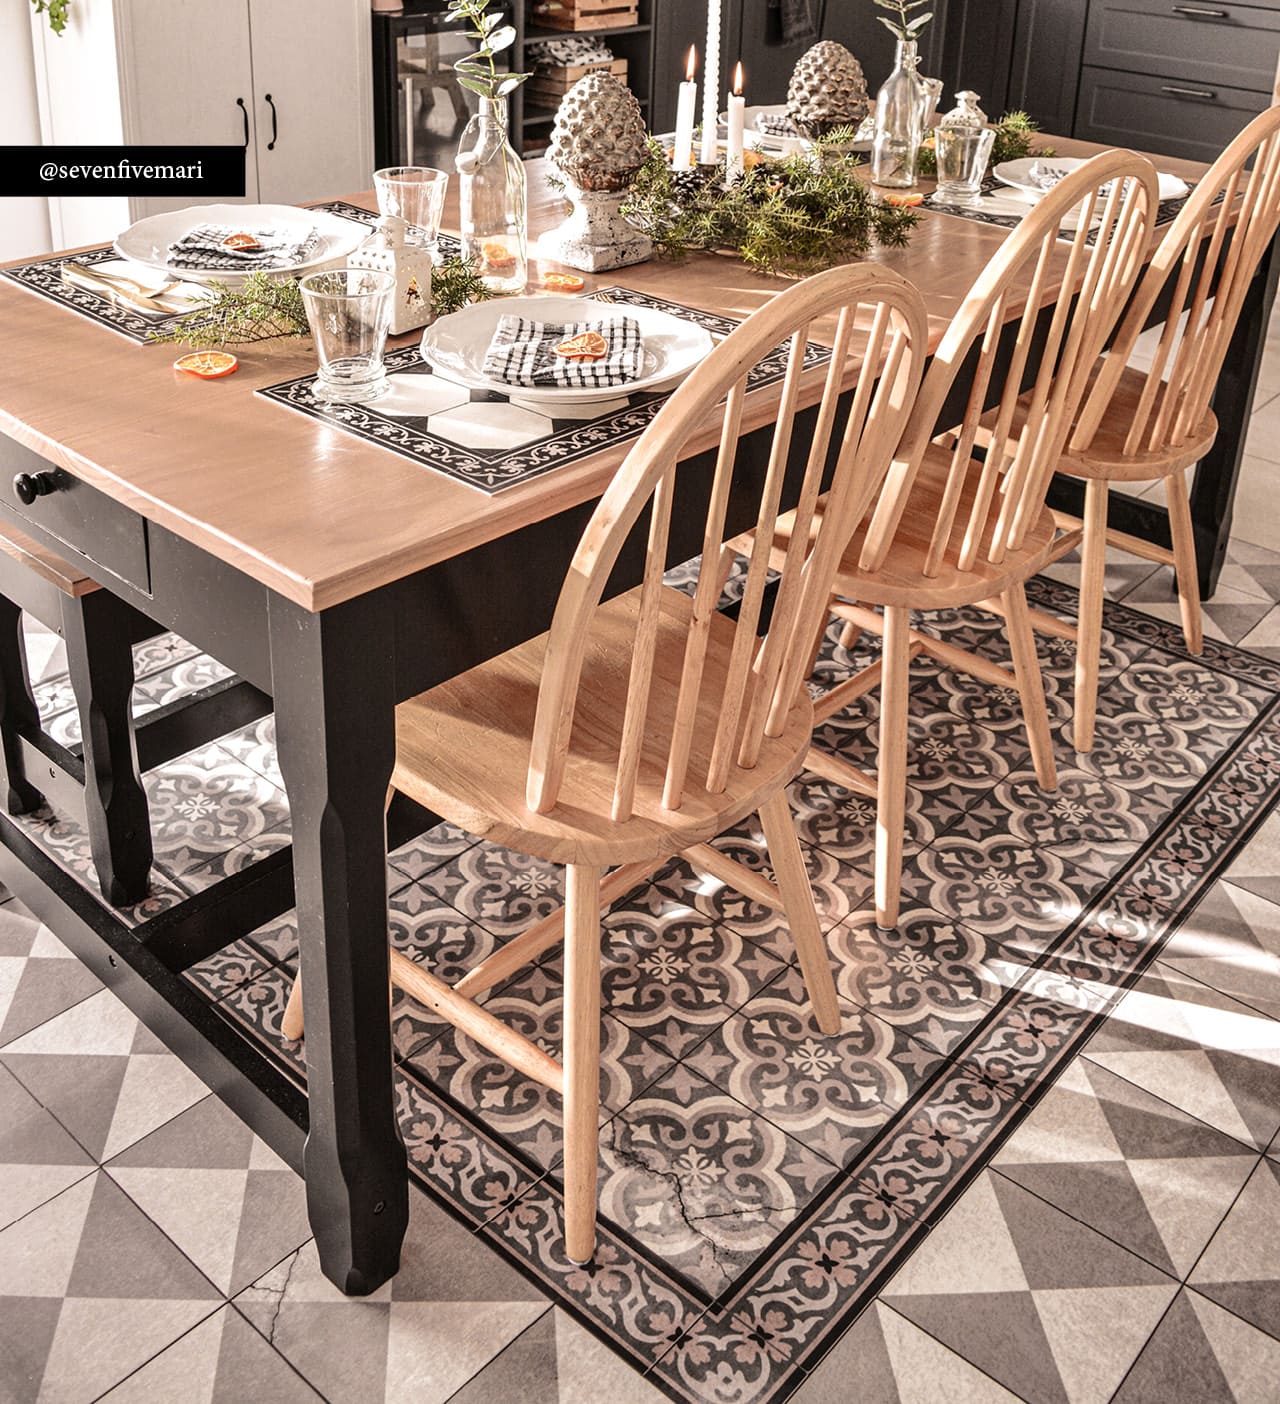 A patterned rug in brown and beige tones under a dining room table